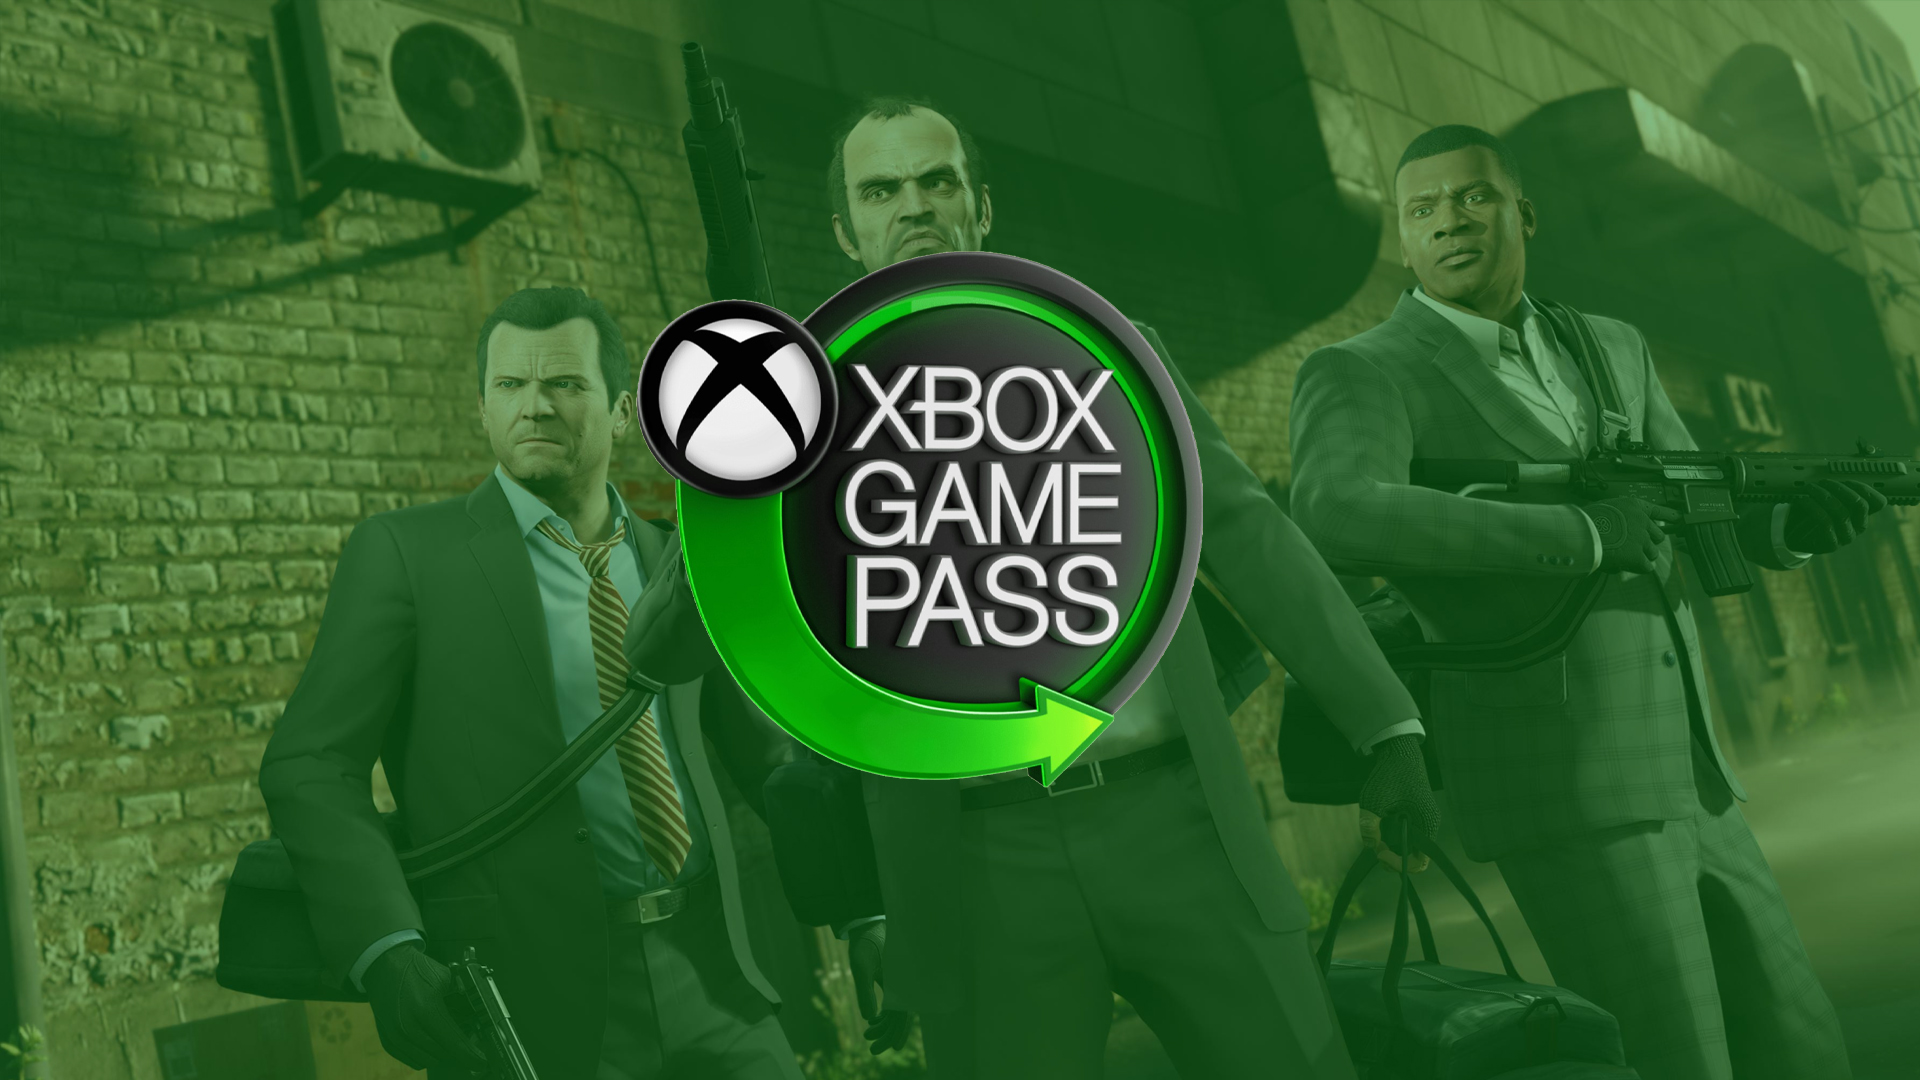 GTA V is back on Xbox Game Pass with a catch